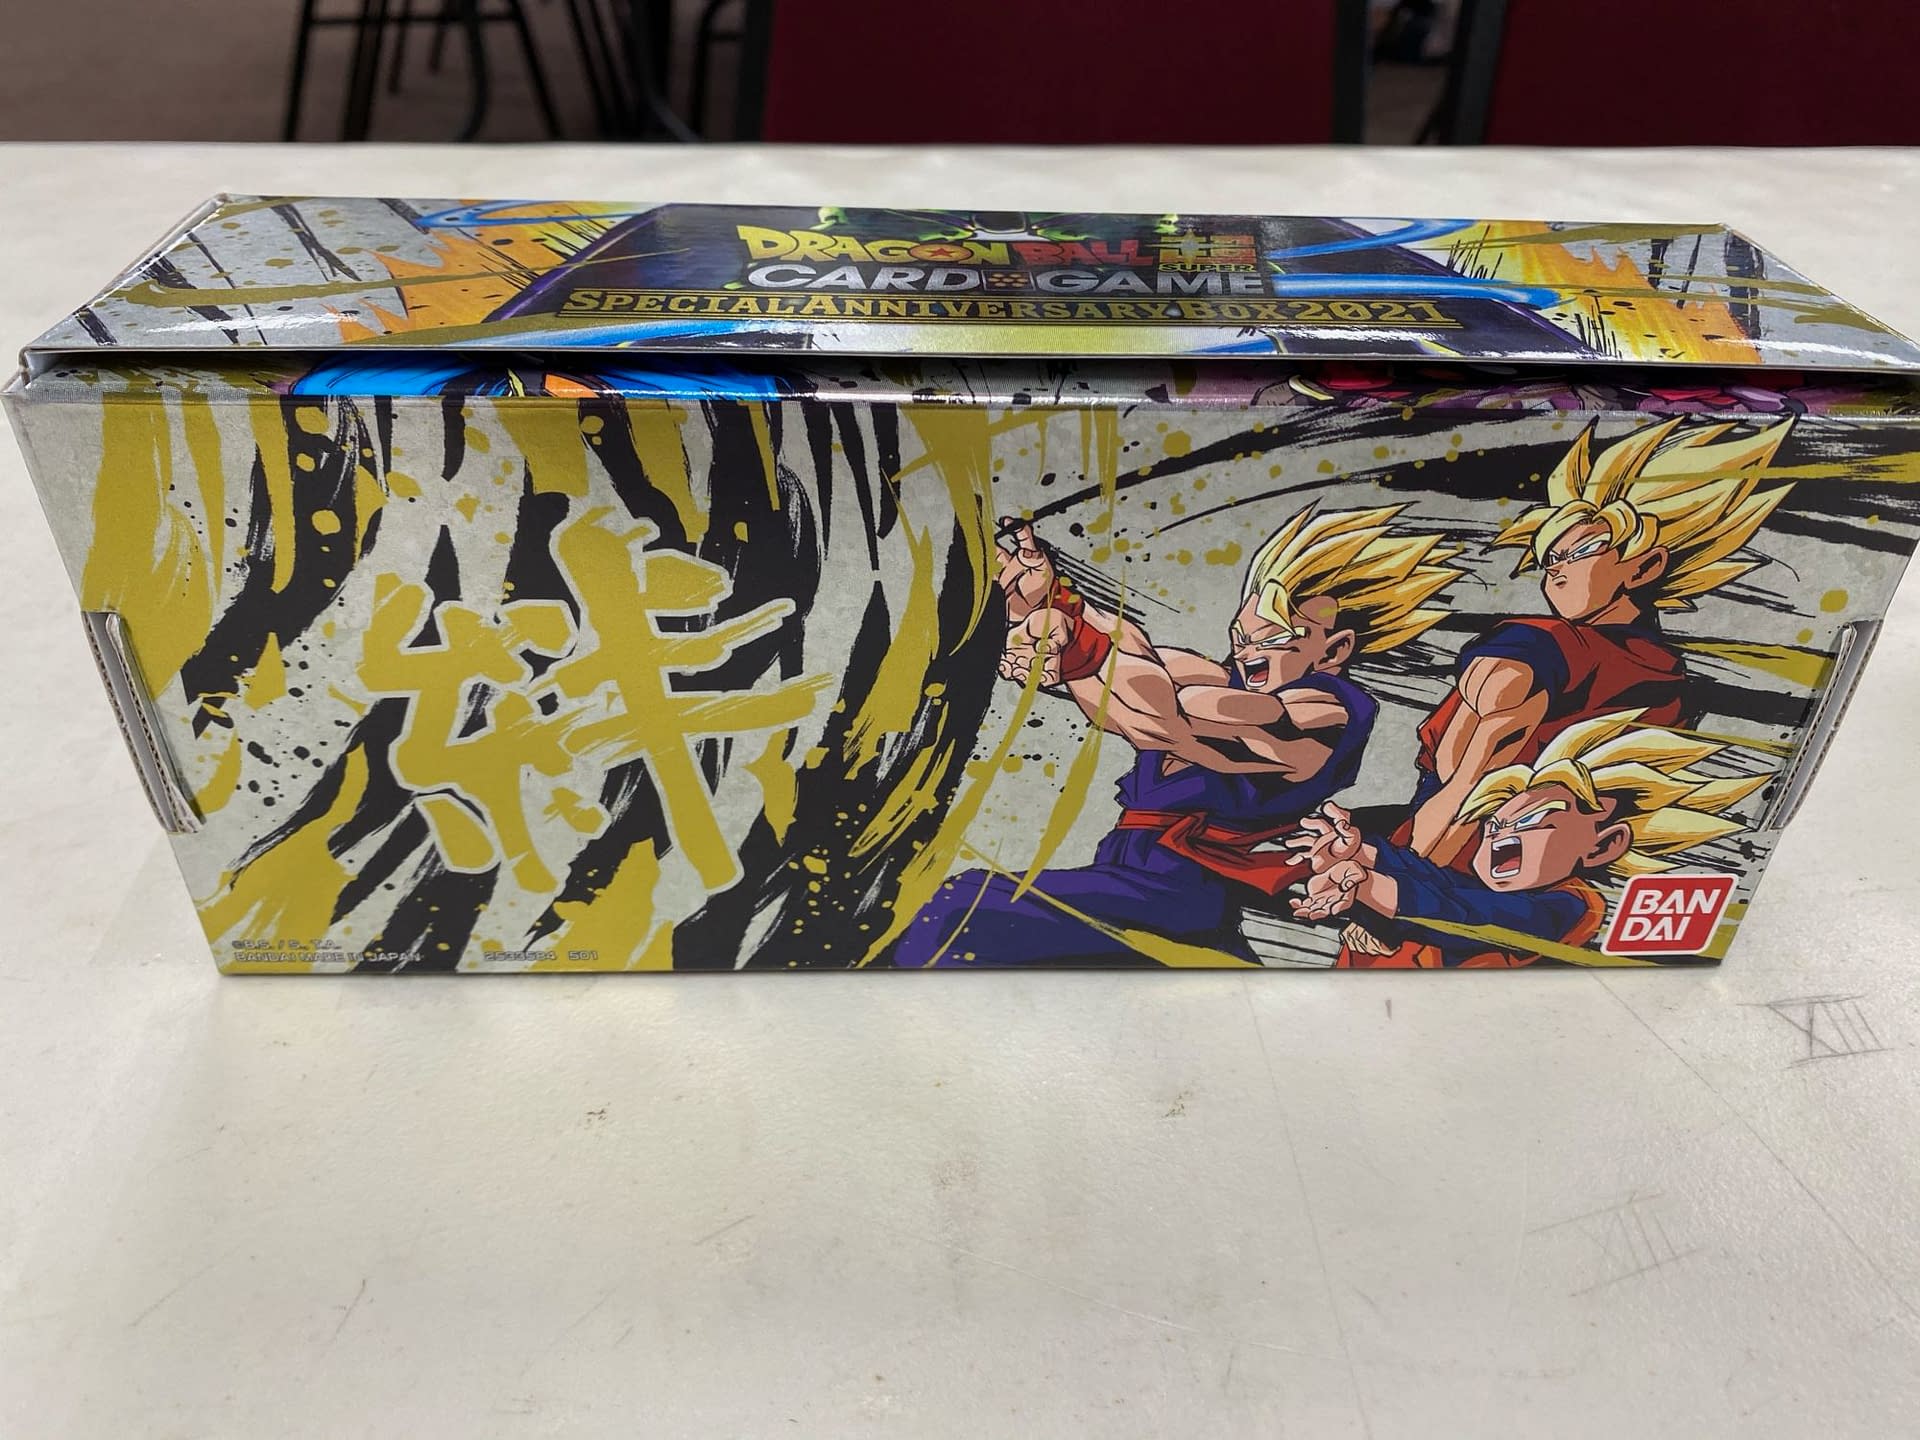 Finally complete! I will be posting the entire series in 2 photograph sets.  Here is issue #1 with “The Box” : r/dbz